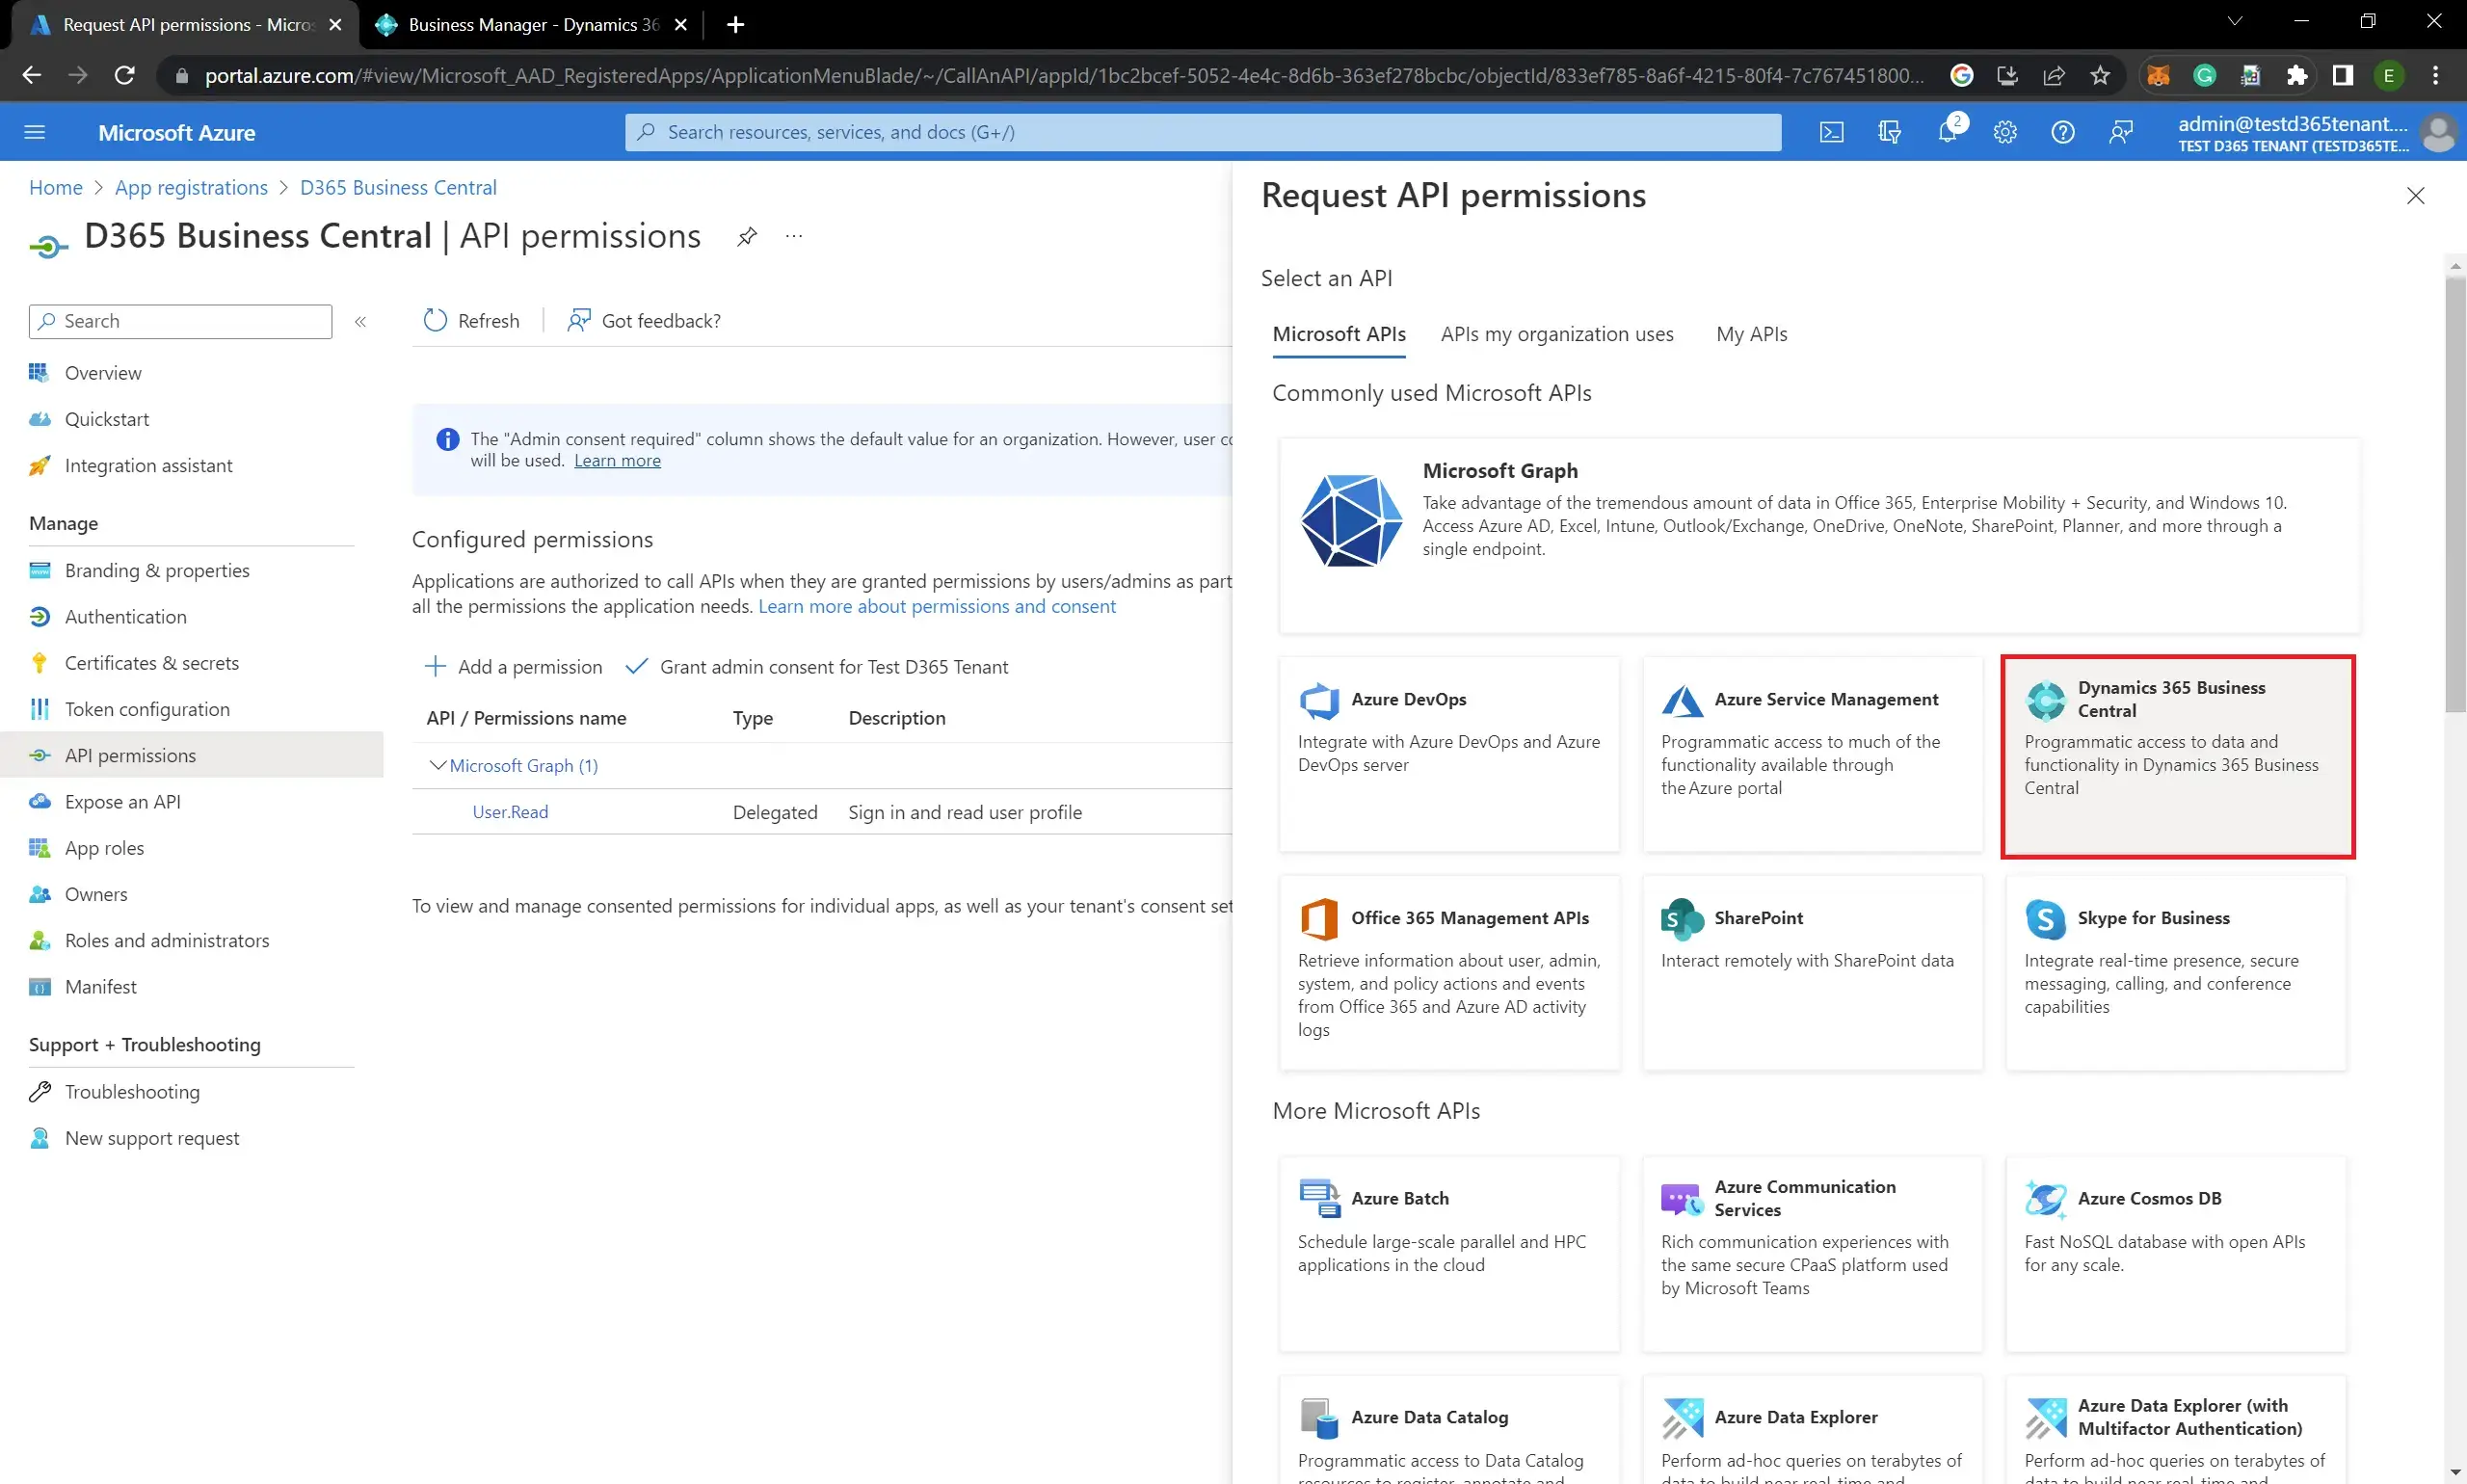 How to Add API Permissions to Business Central App in Azure Portal